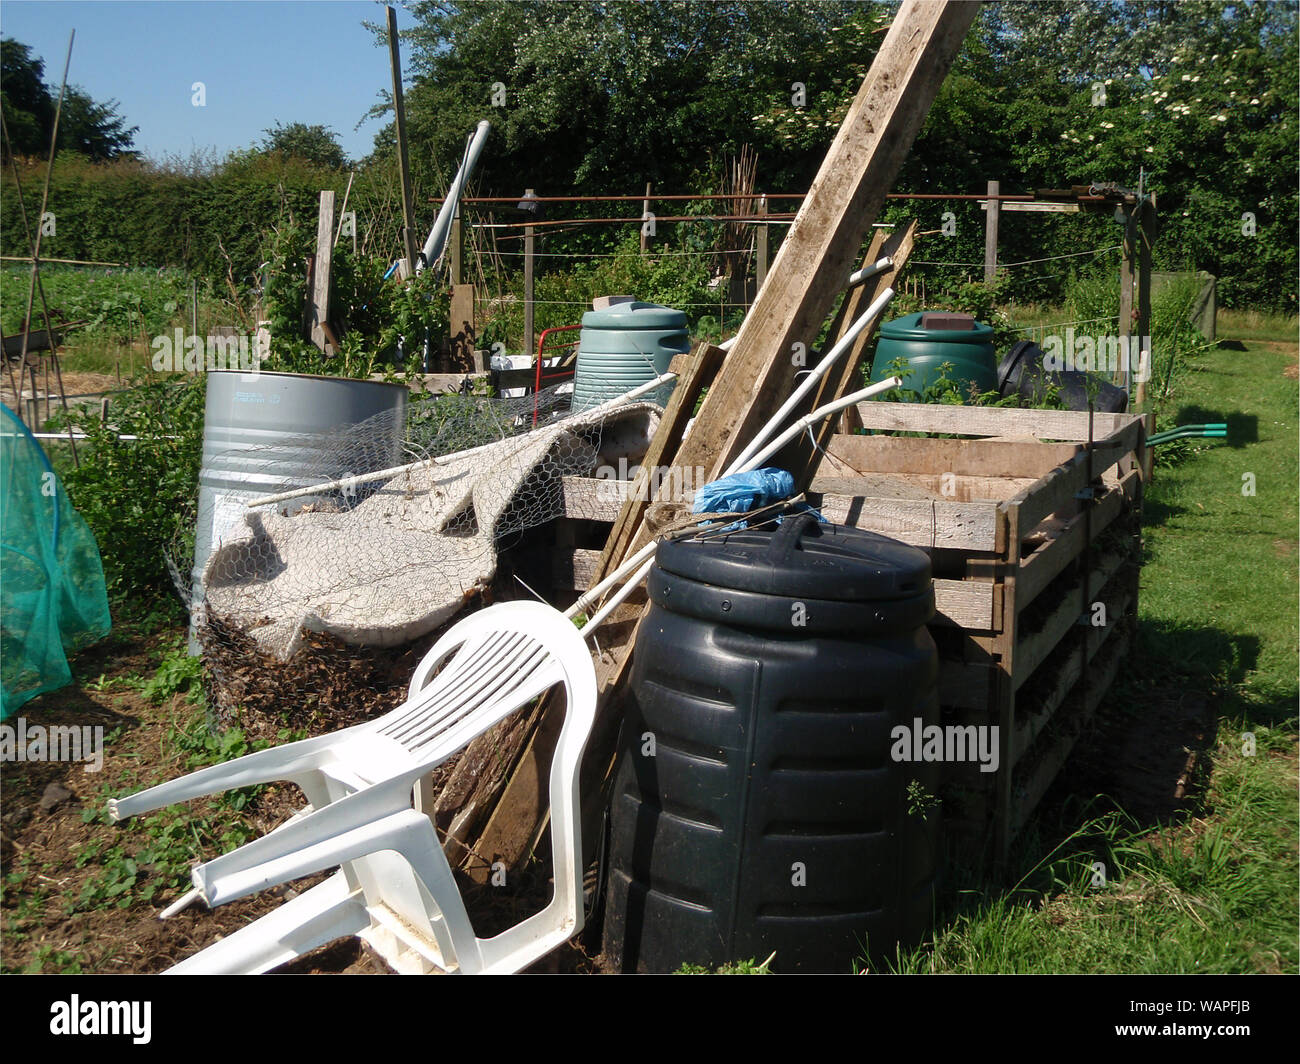 A view looking across an allotment garden with a collection of items of compost bins, sticks, plastic chair, netting, wooden container and fruit frame Stock Photo